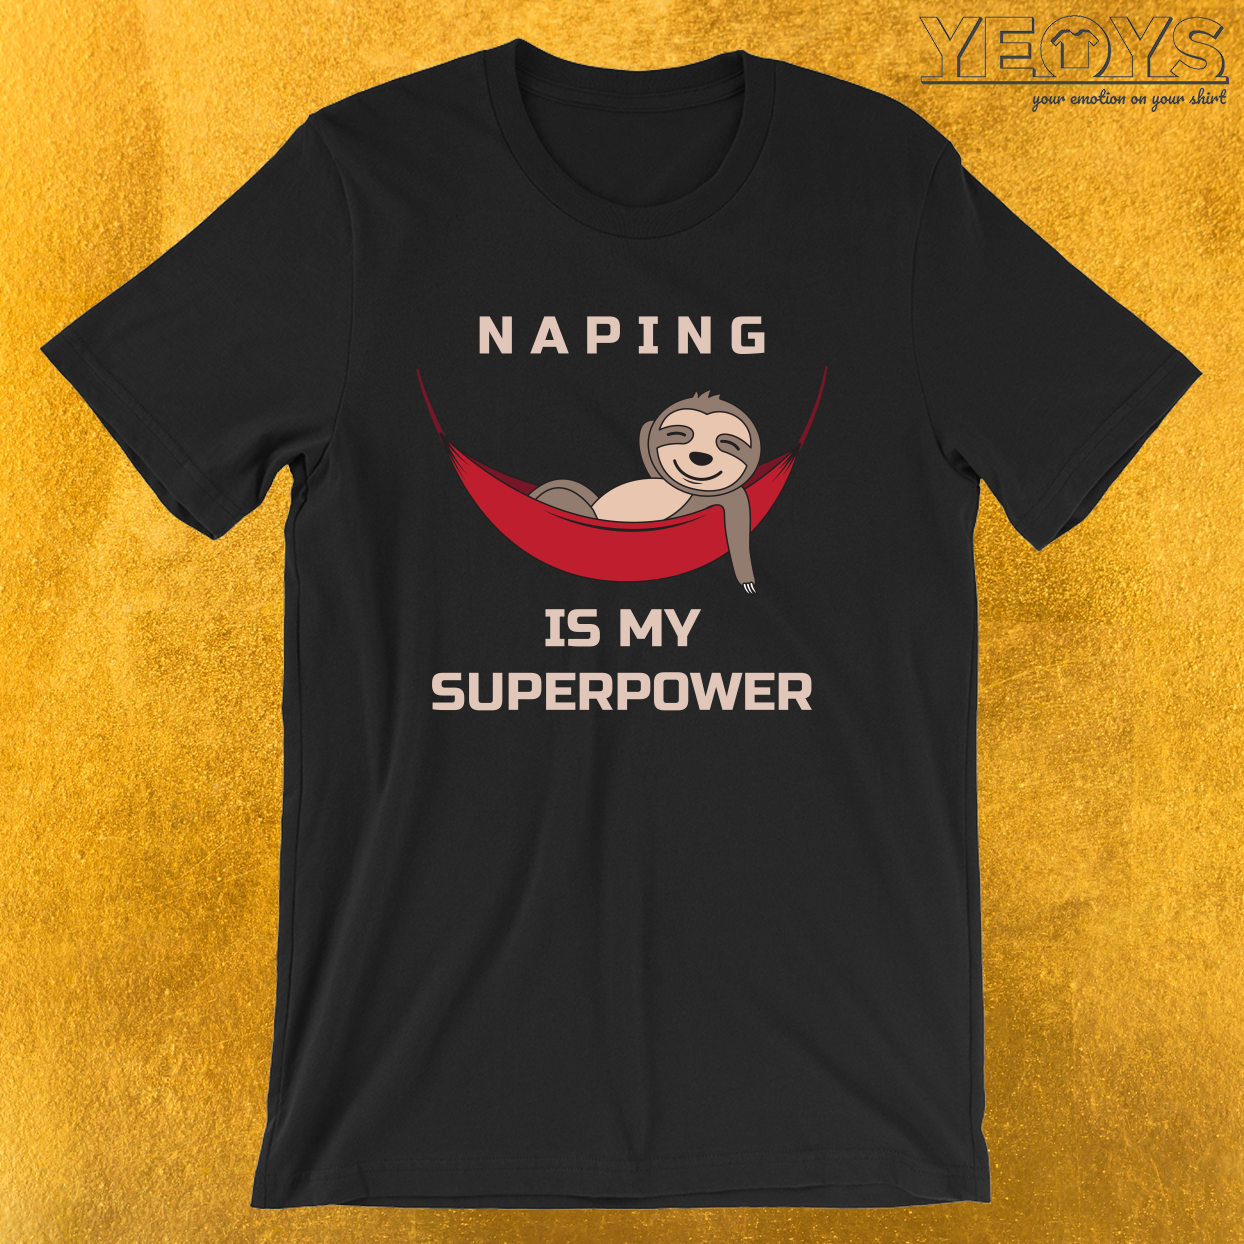 Naping Is My Superpower – Funny Sloth Tee